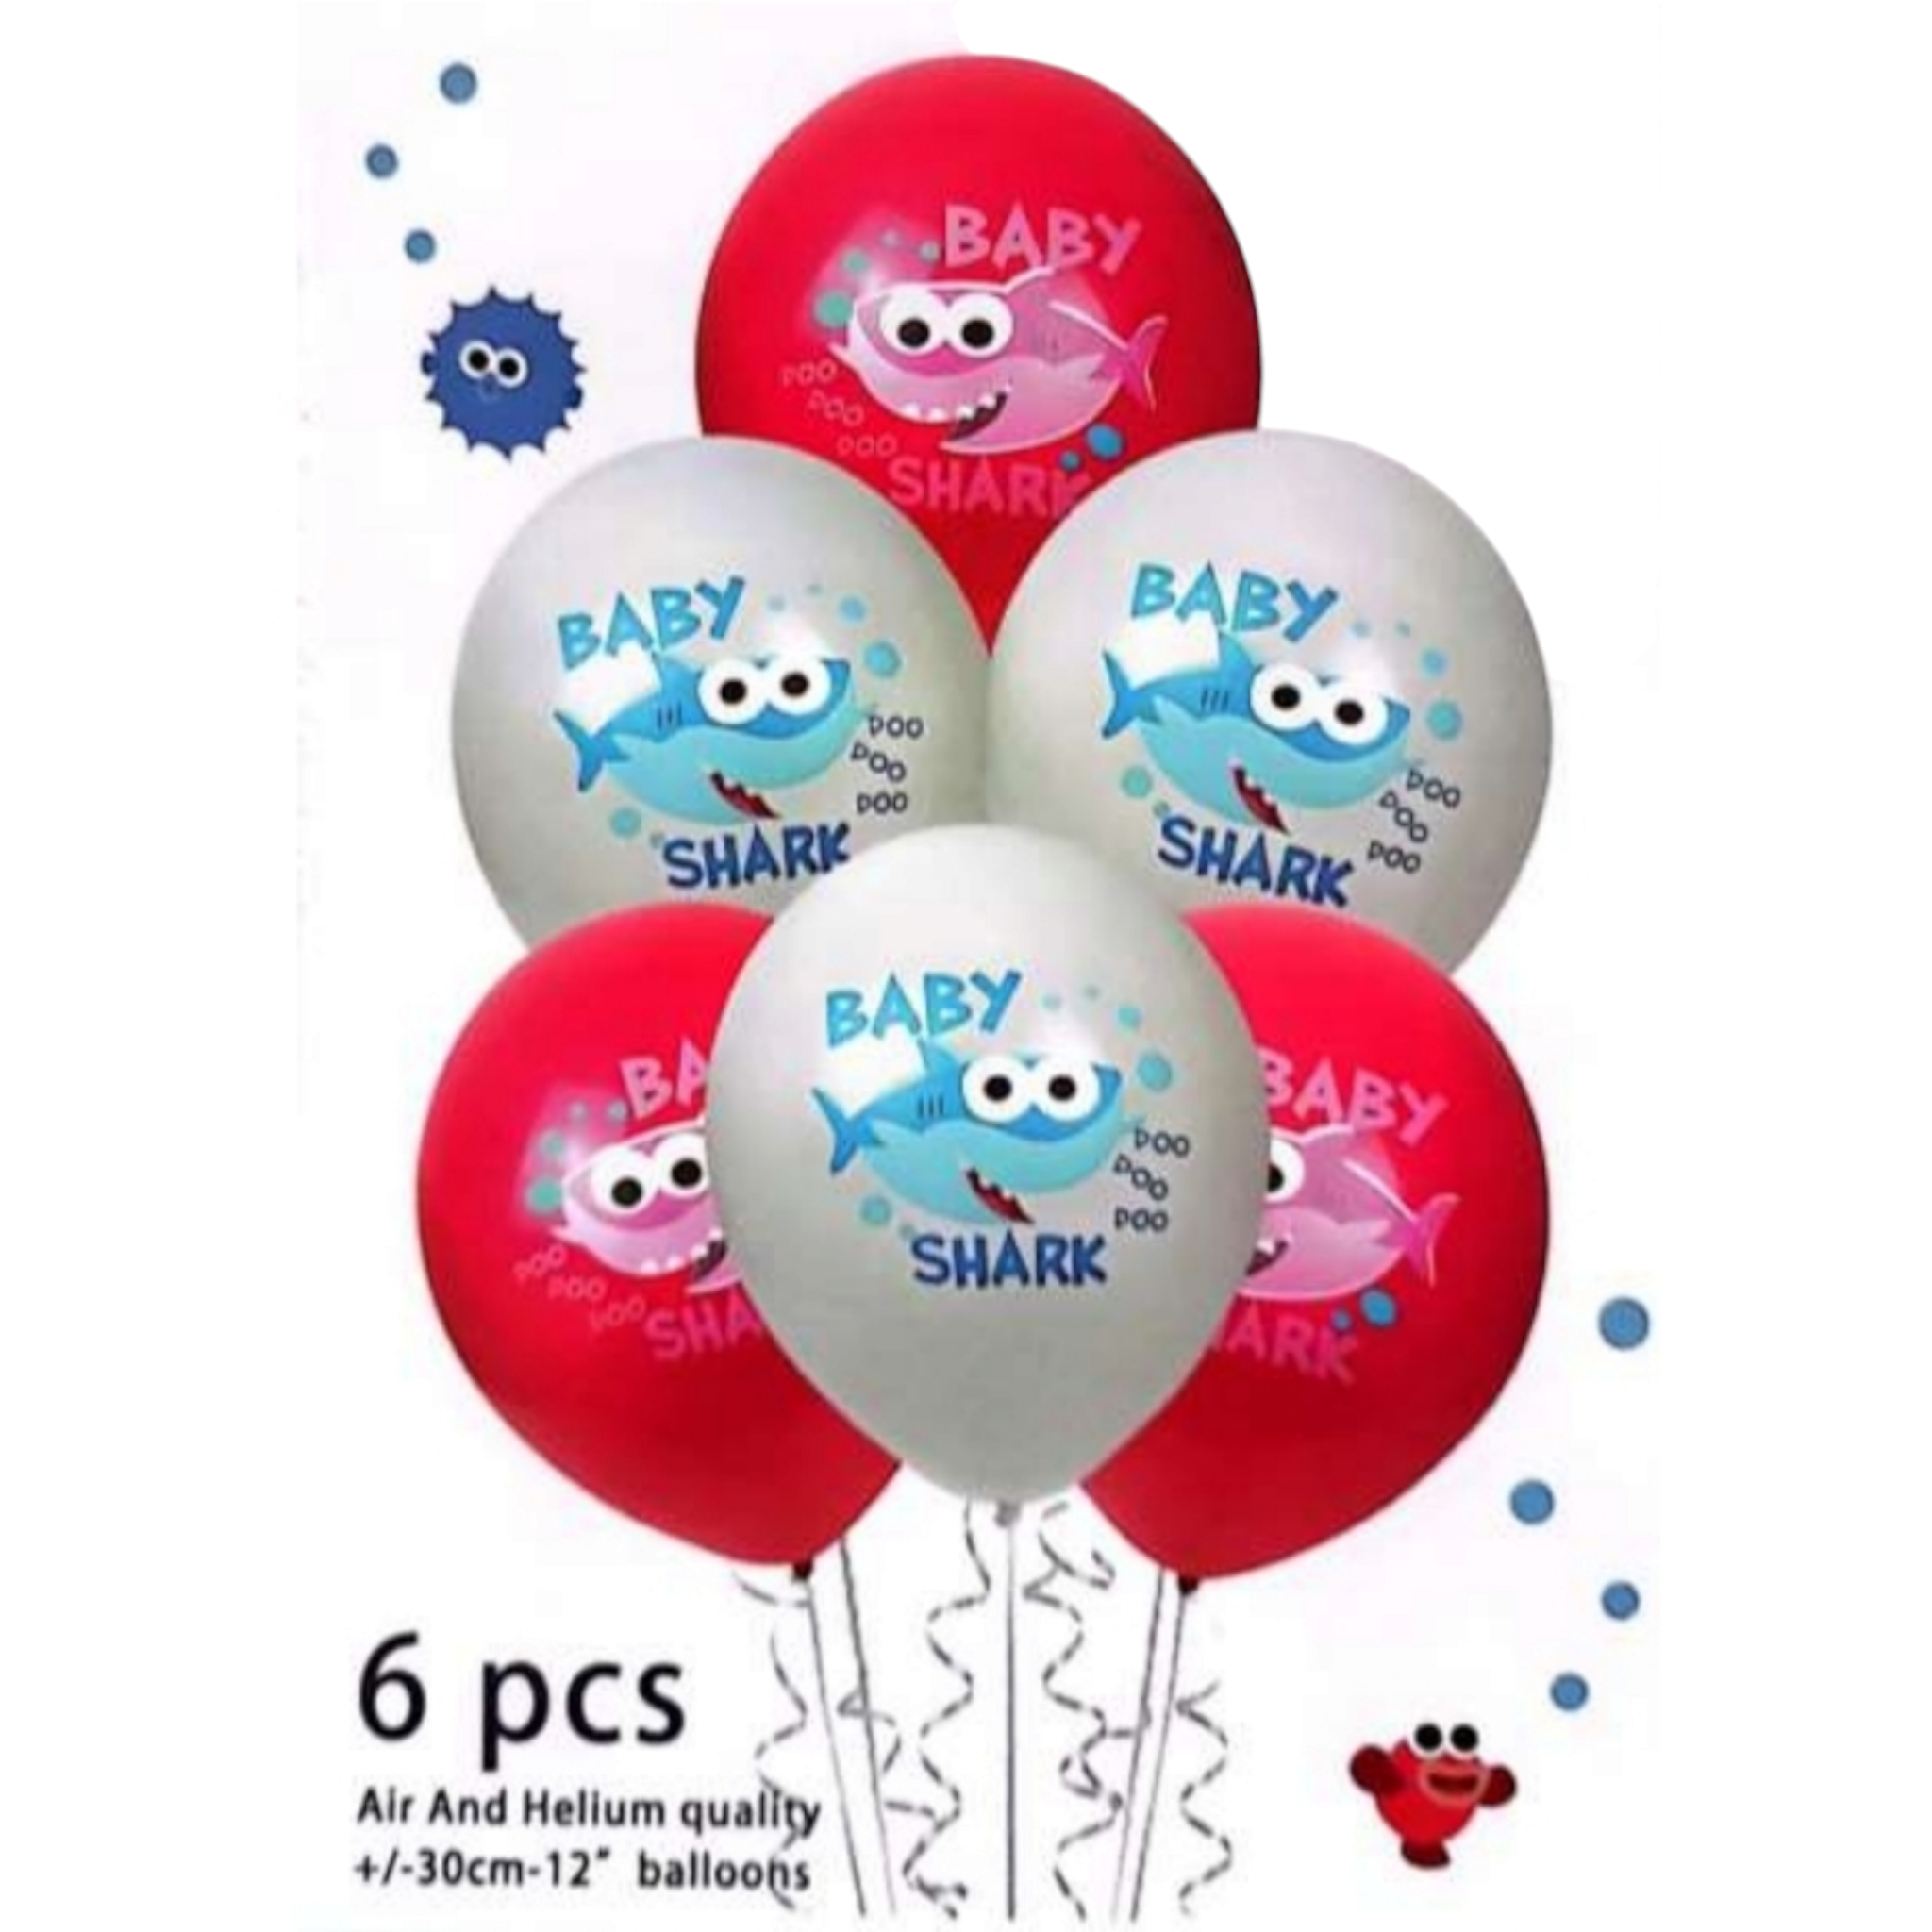 Baby Shark Party Toy Balloon 6pc Set